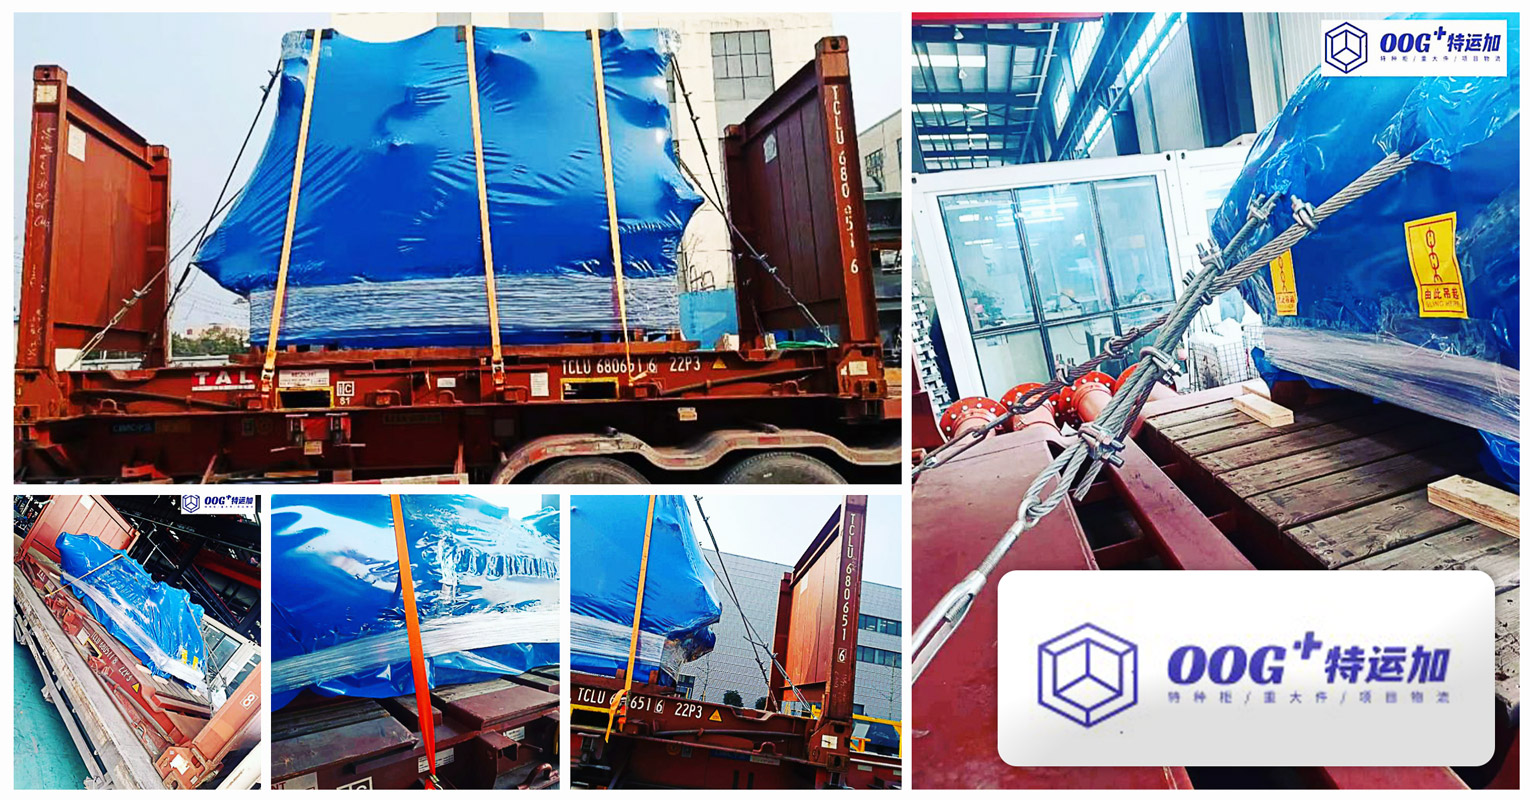 OOG Plus (formerly Shanghai Beetle) Shipped 2 x 20FR from Shagnhai to Fremantle